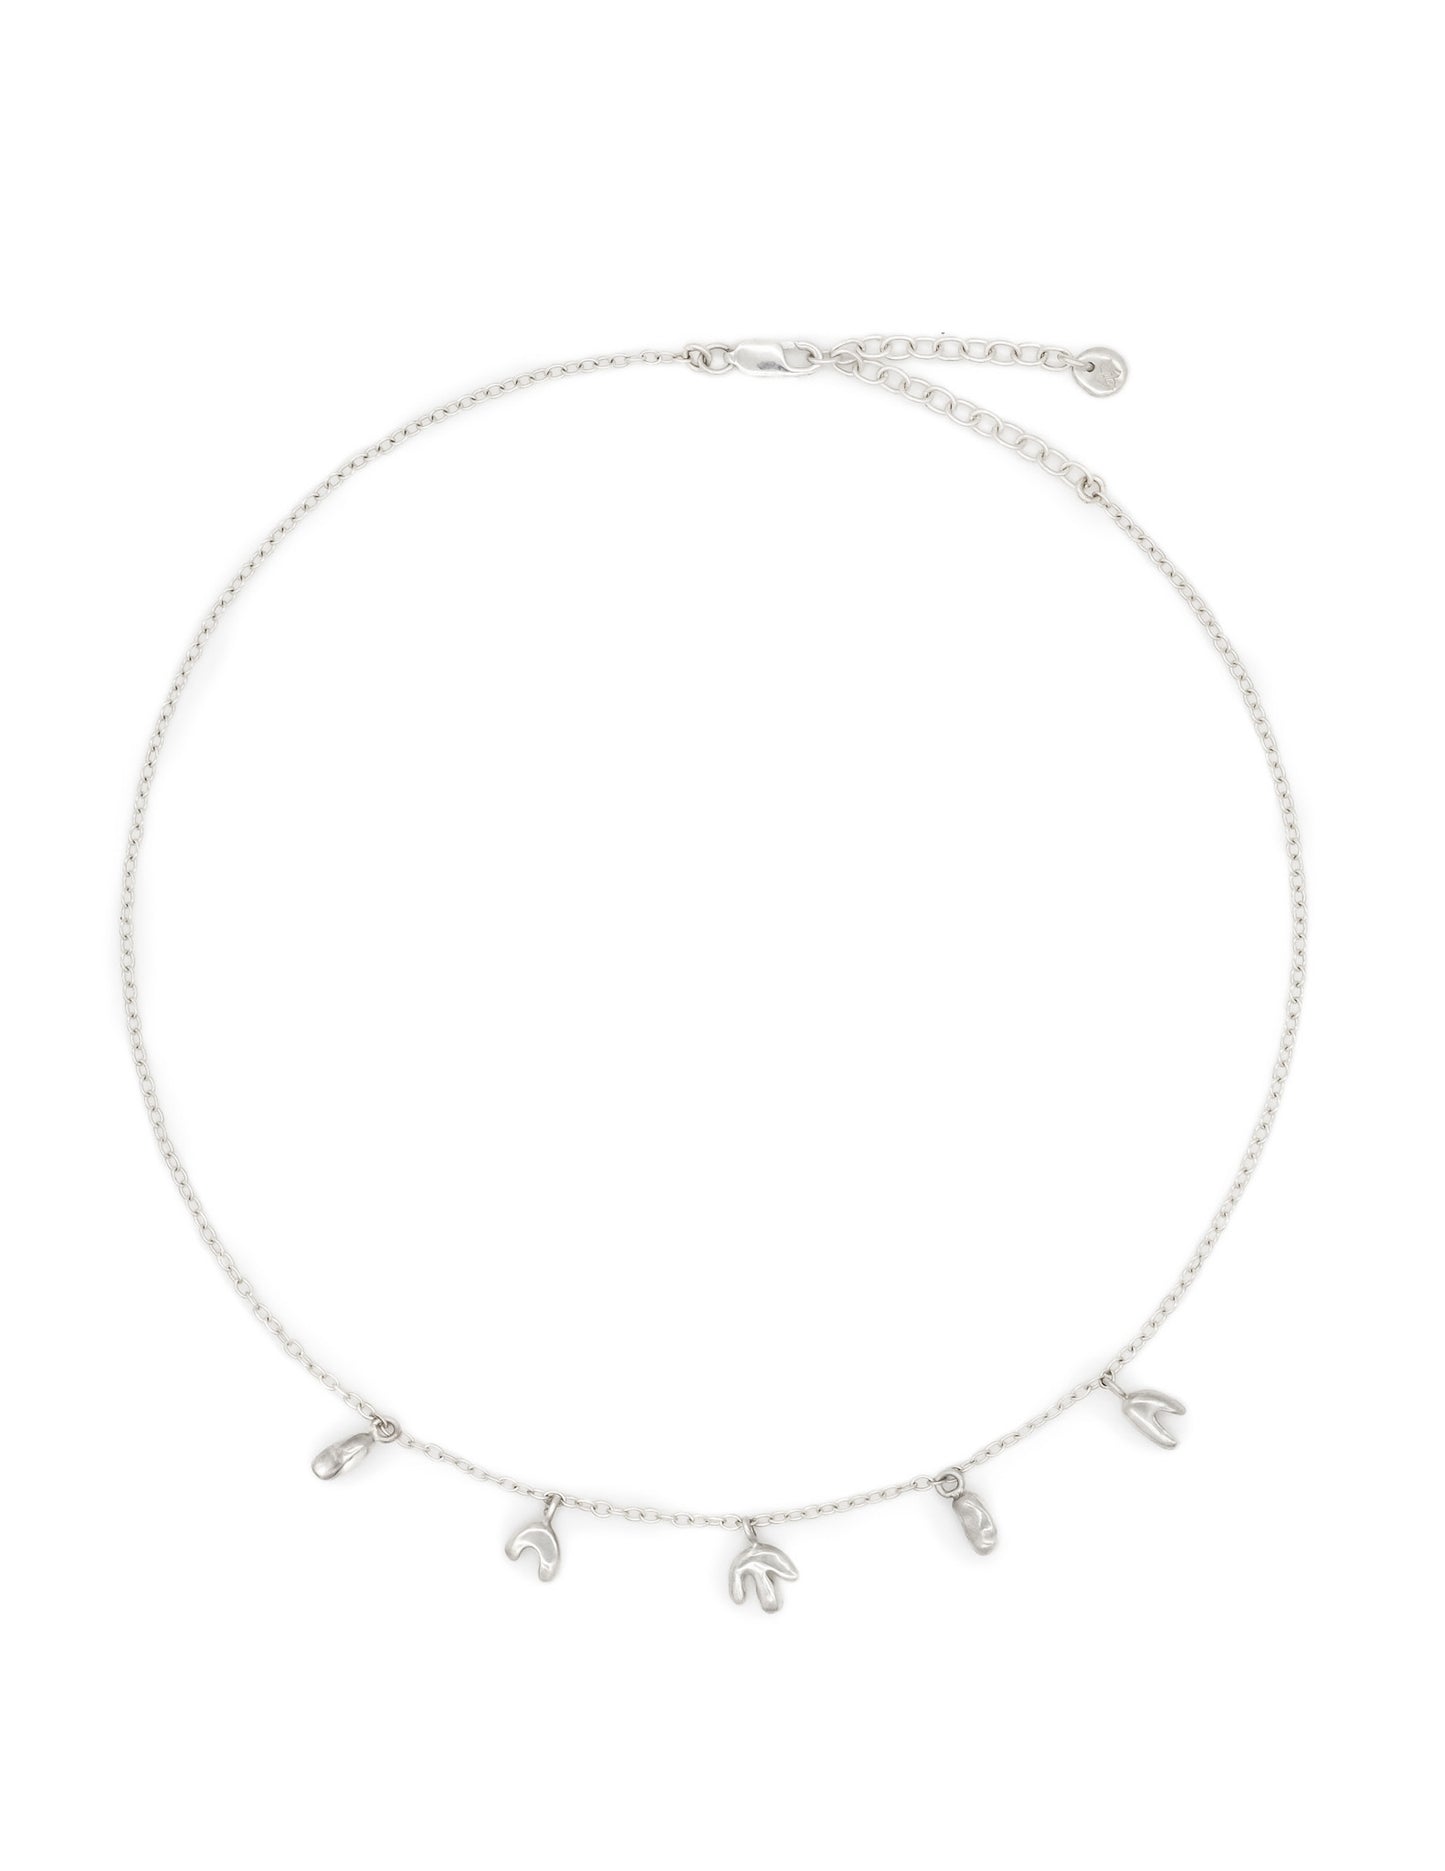 Kharys jewerly icicle charms organic shaped sterling silver necklace